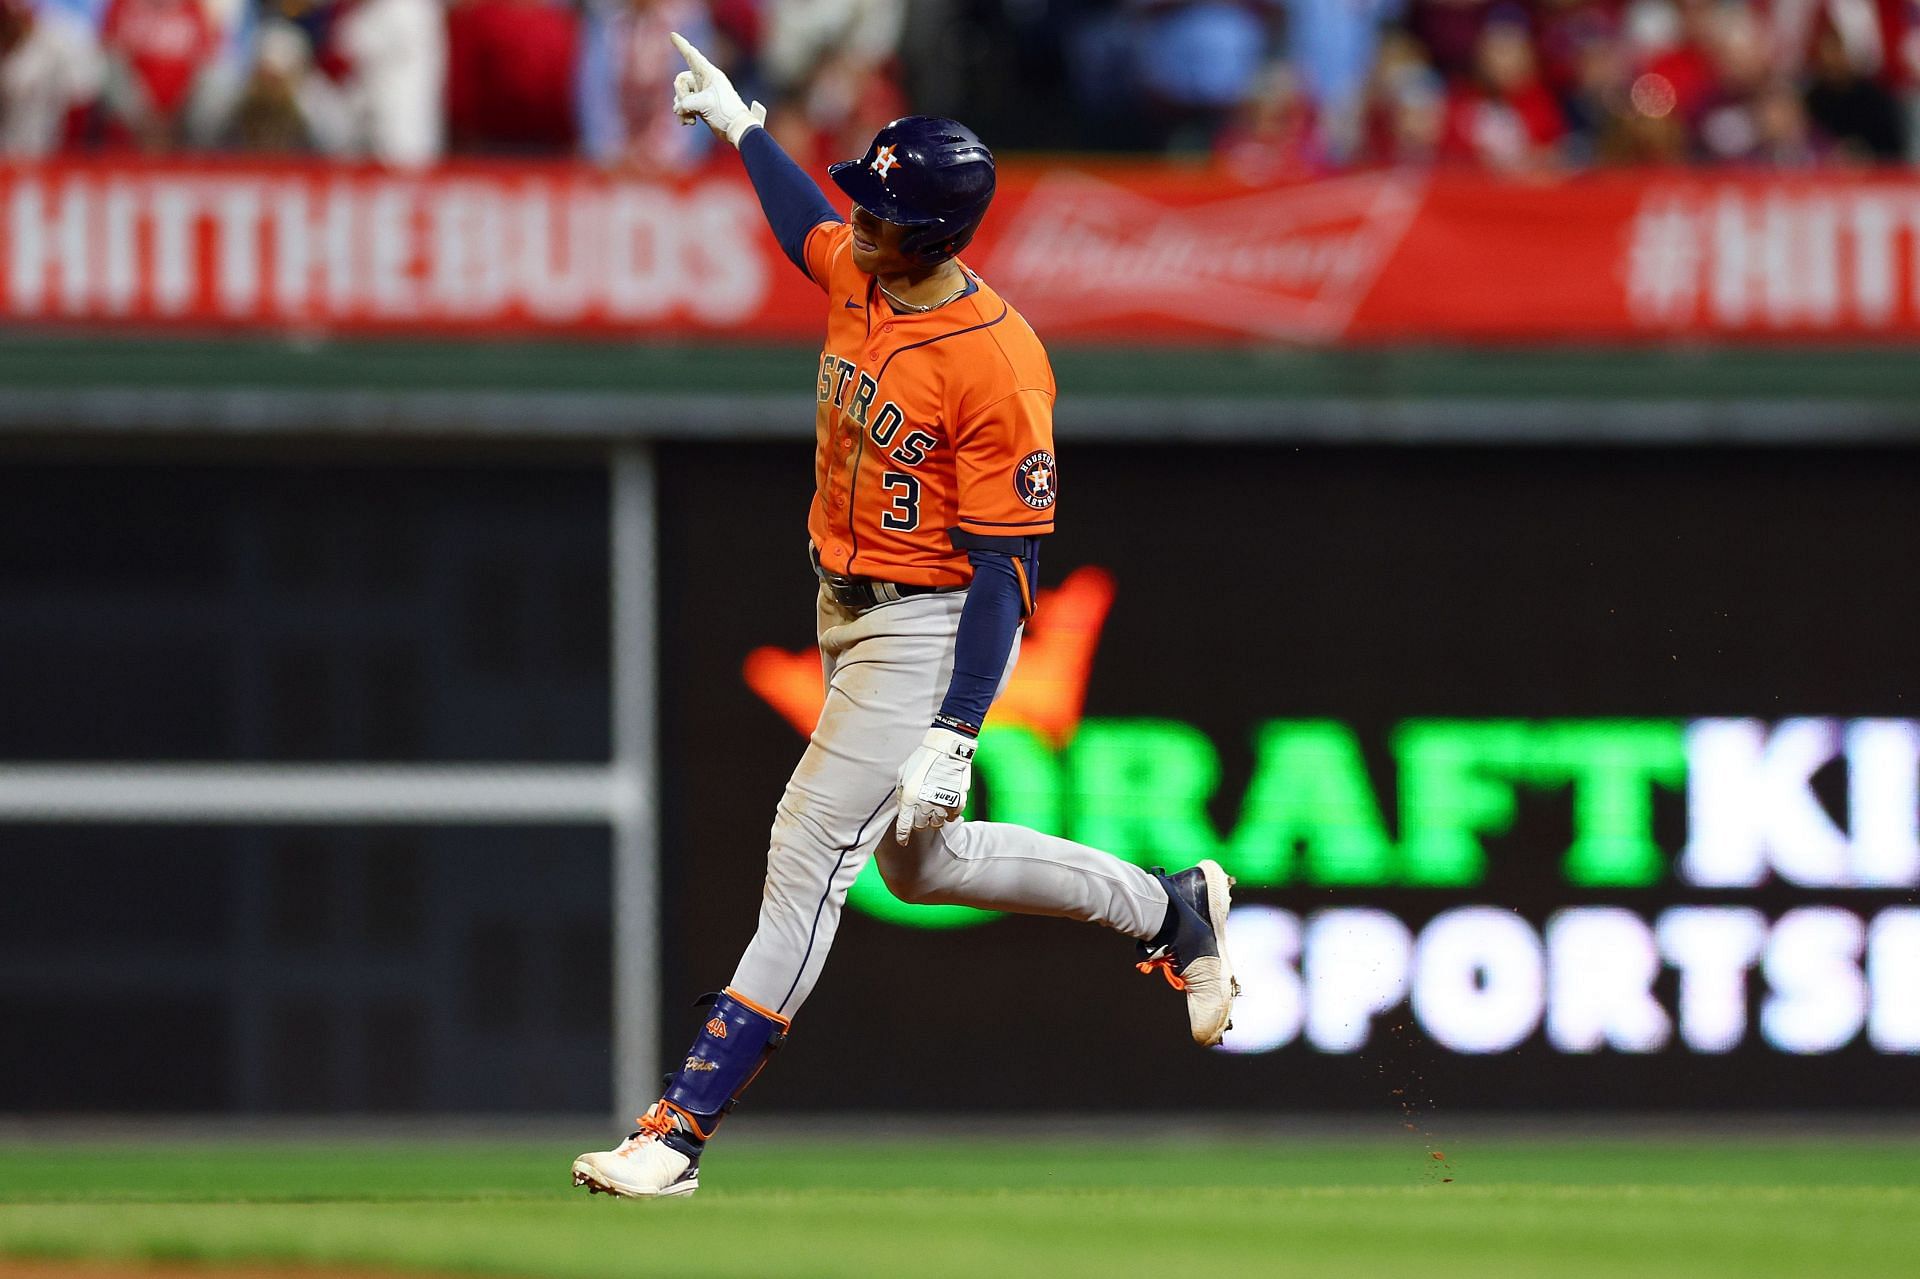 Houston Astros superstar Jeremy Pena destroys a pitch while enjoying his  offseason: The World Series may be long over, but the MVP is still raking